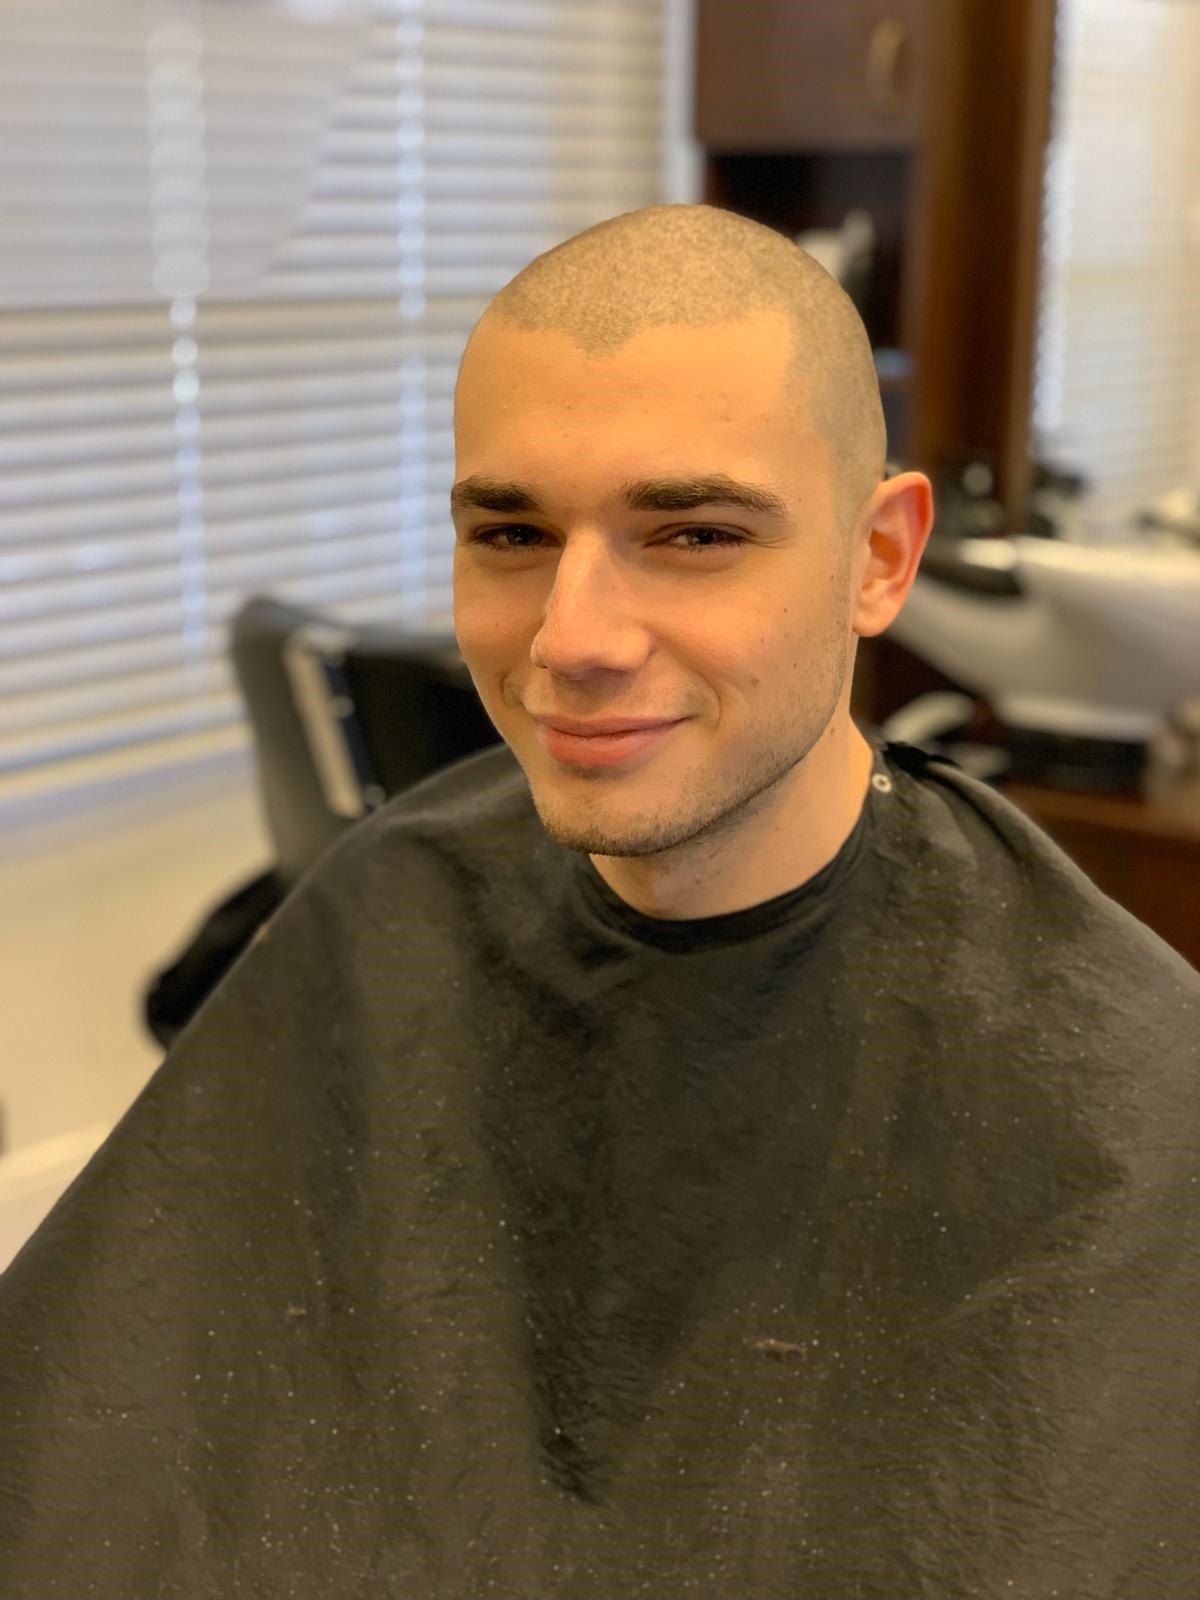 Jamie shaved his own hair and raised more than £17,000